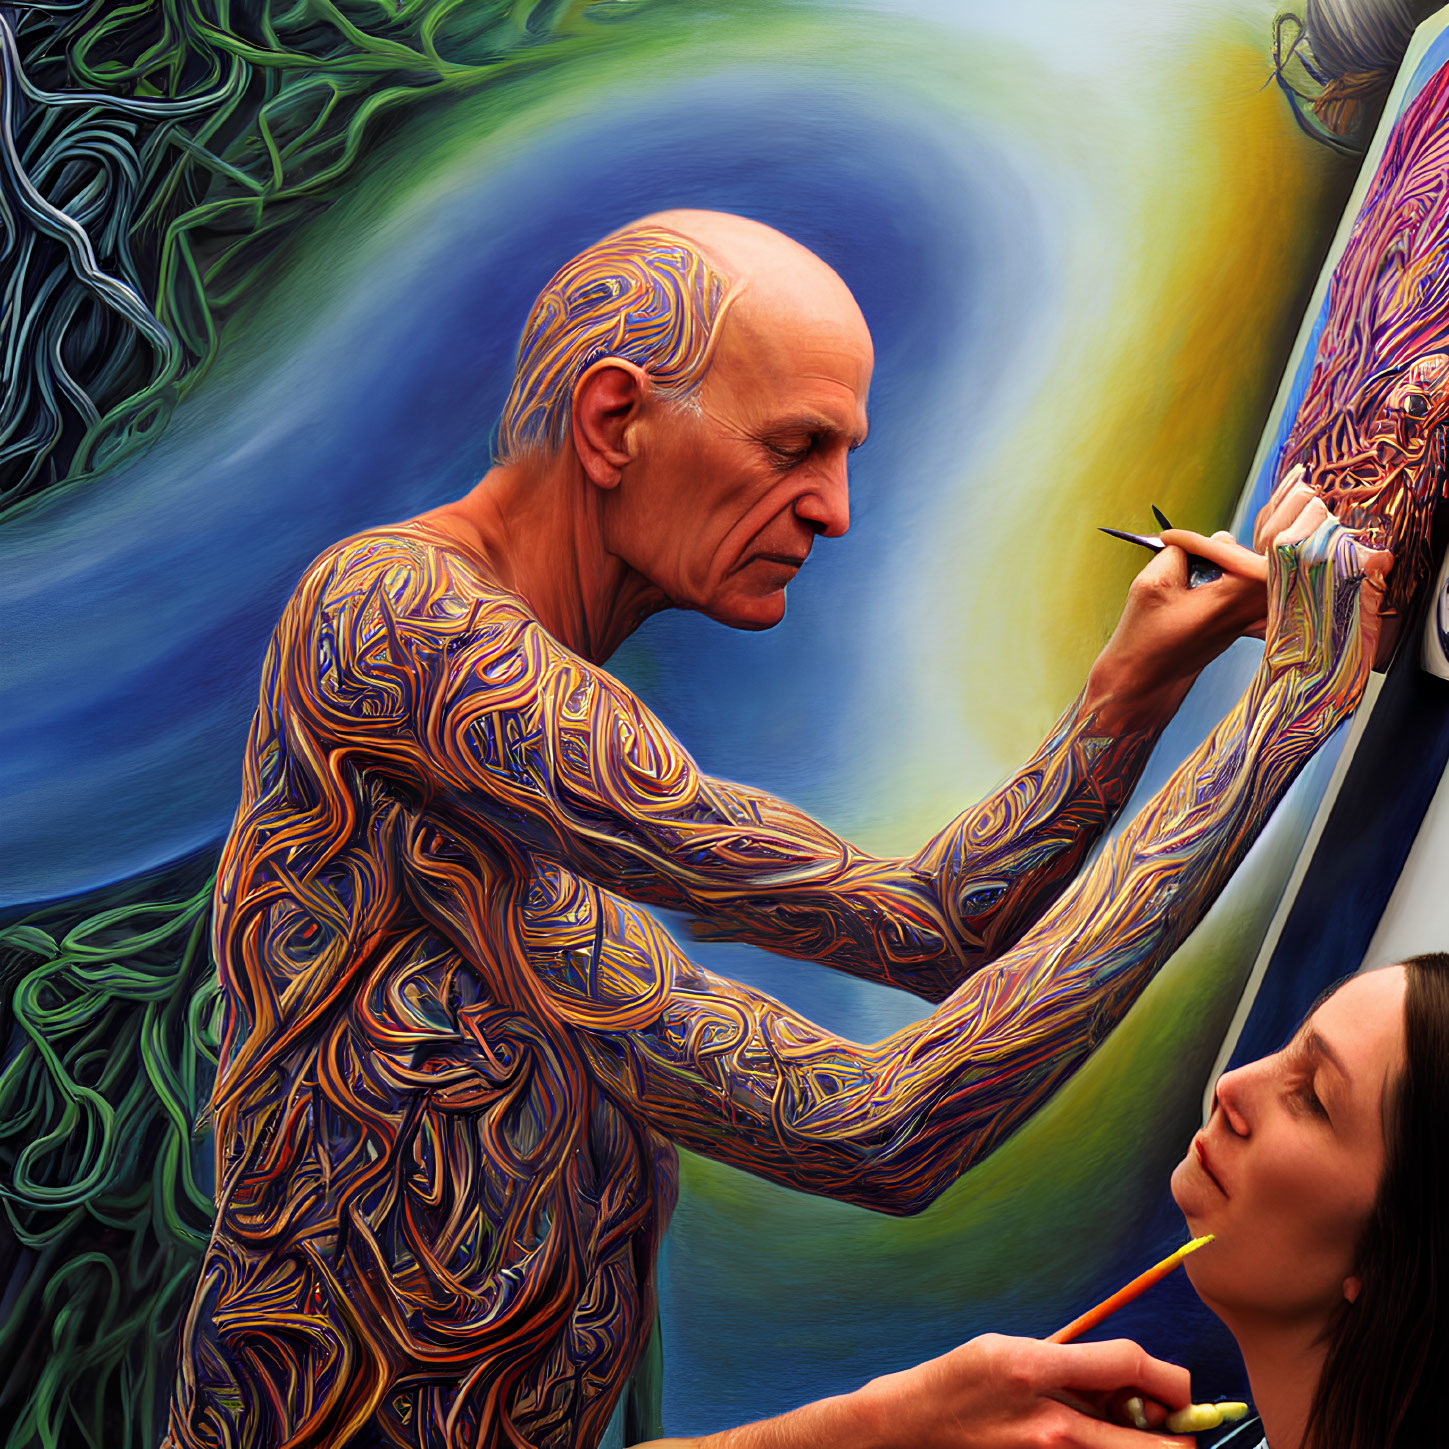 Elderly artist with intricate tattoos painting colorful portrait of woman